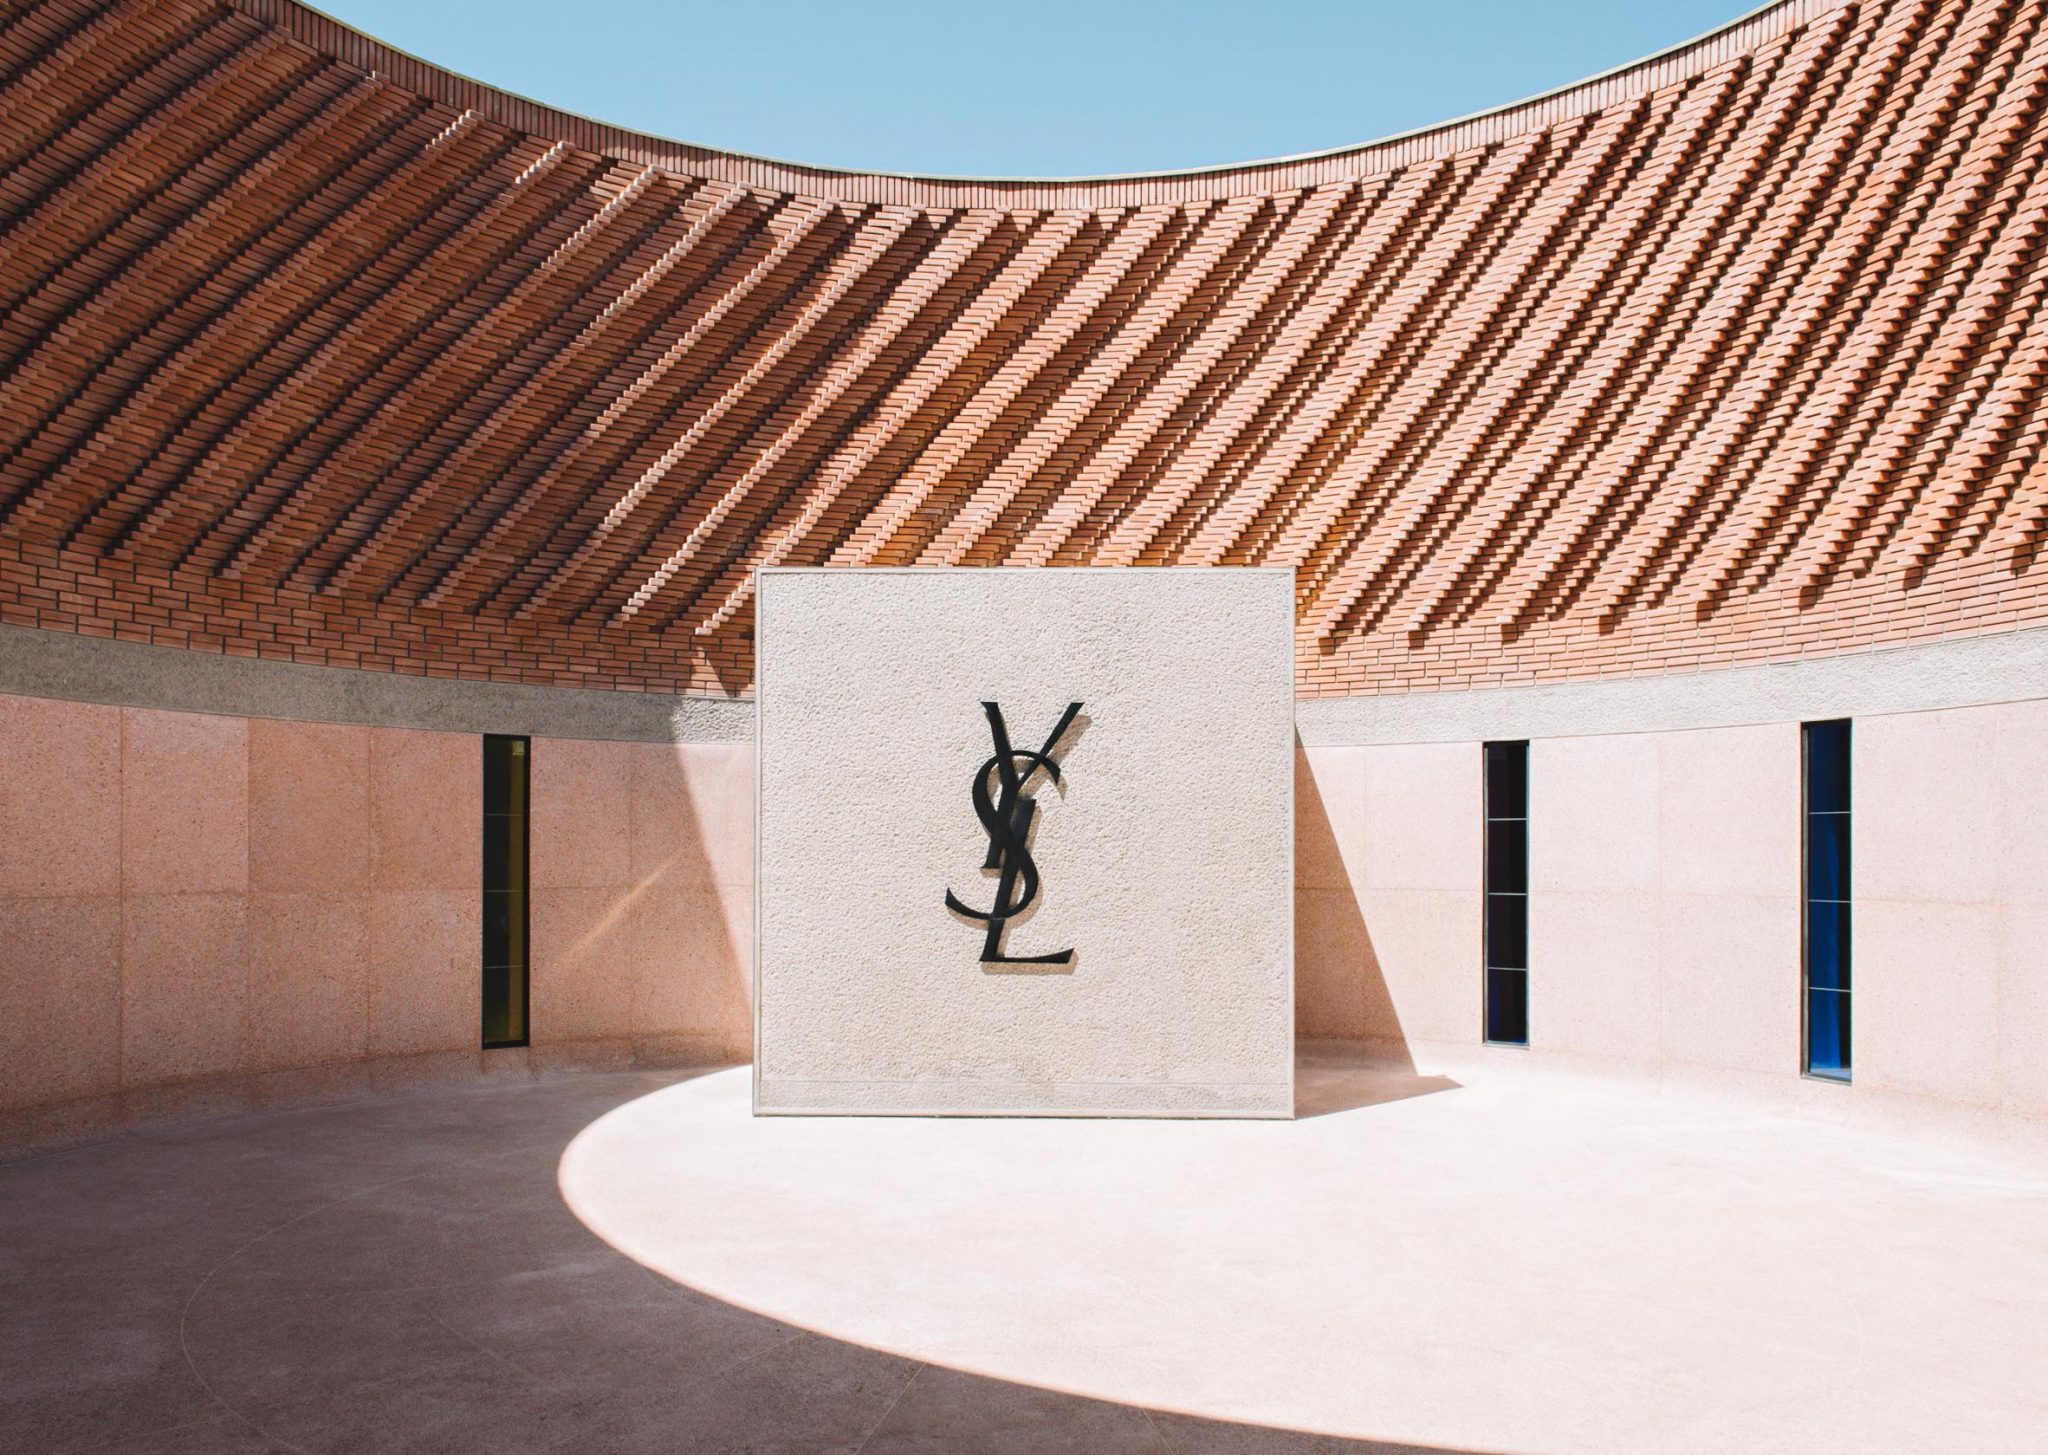 A Look Into the Marrakesh Yves Saint Laurent Museum